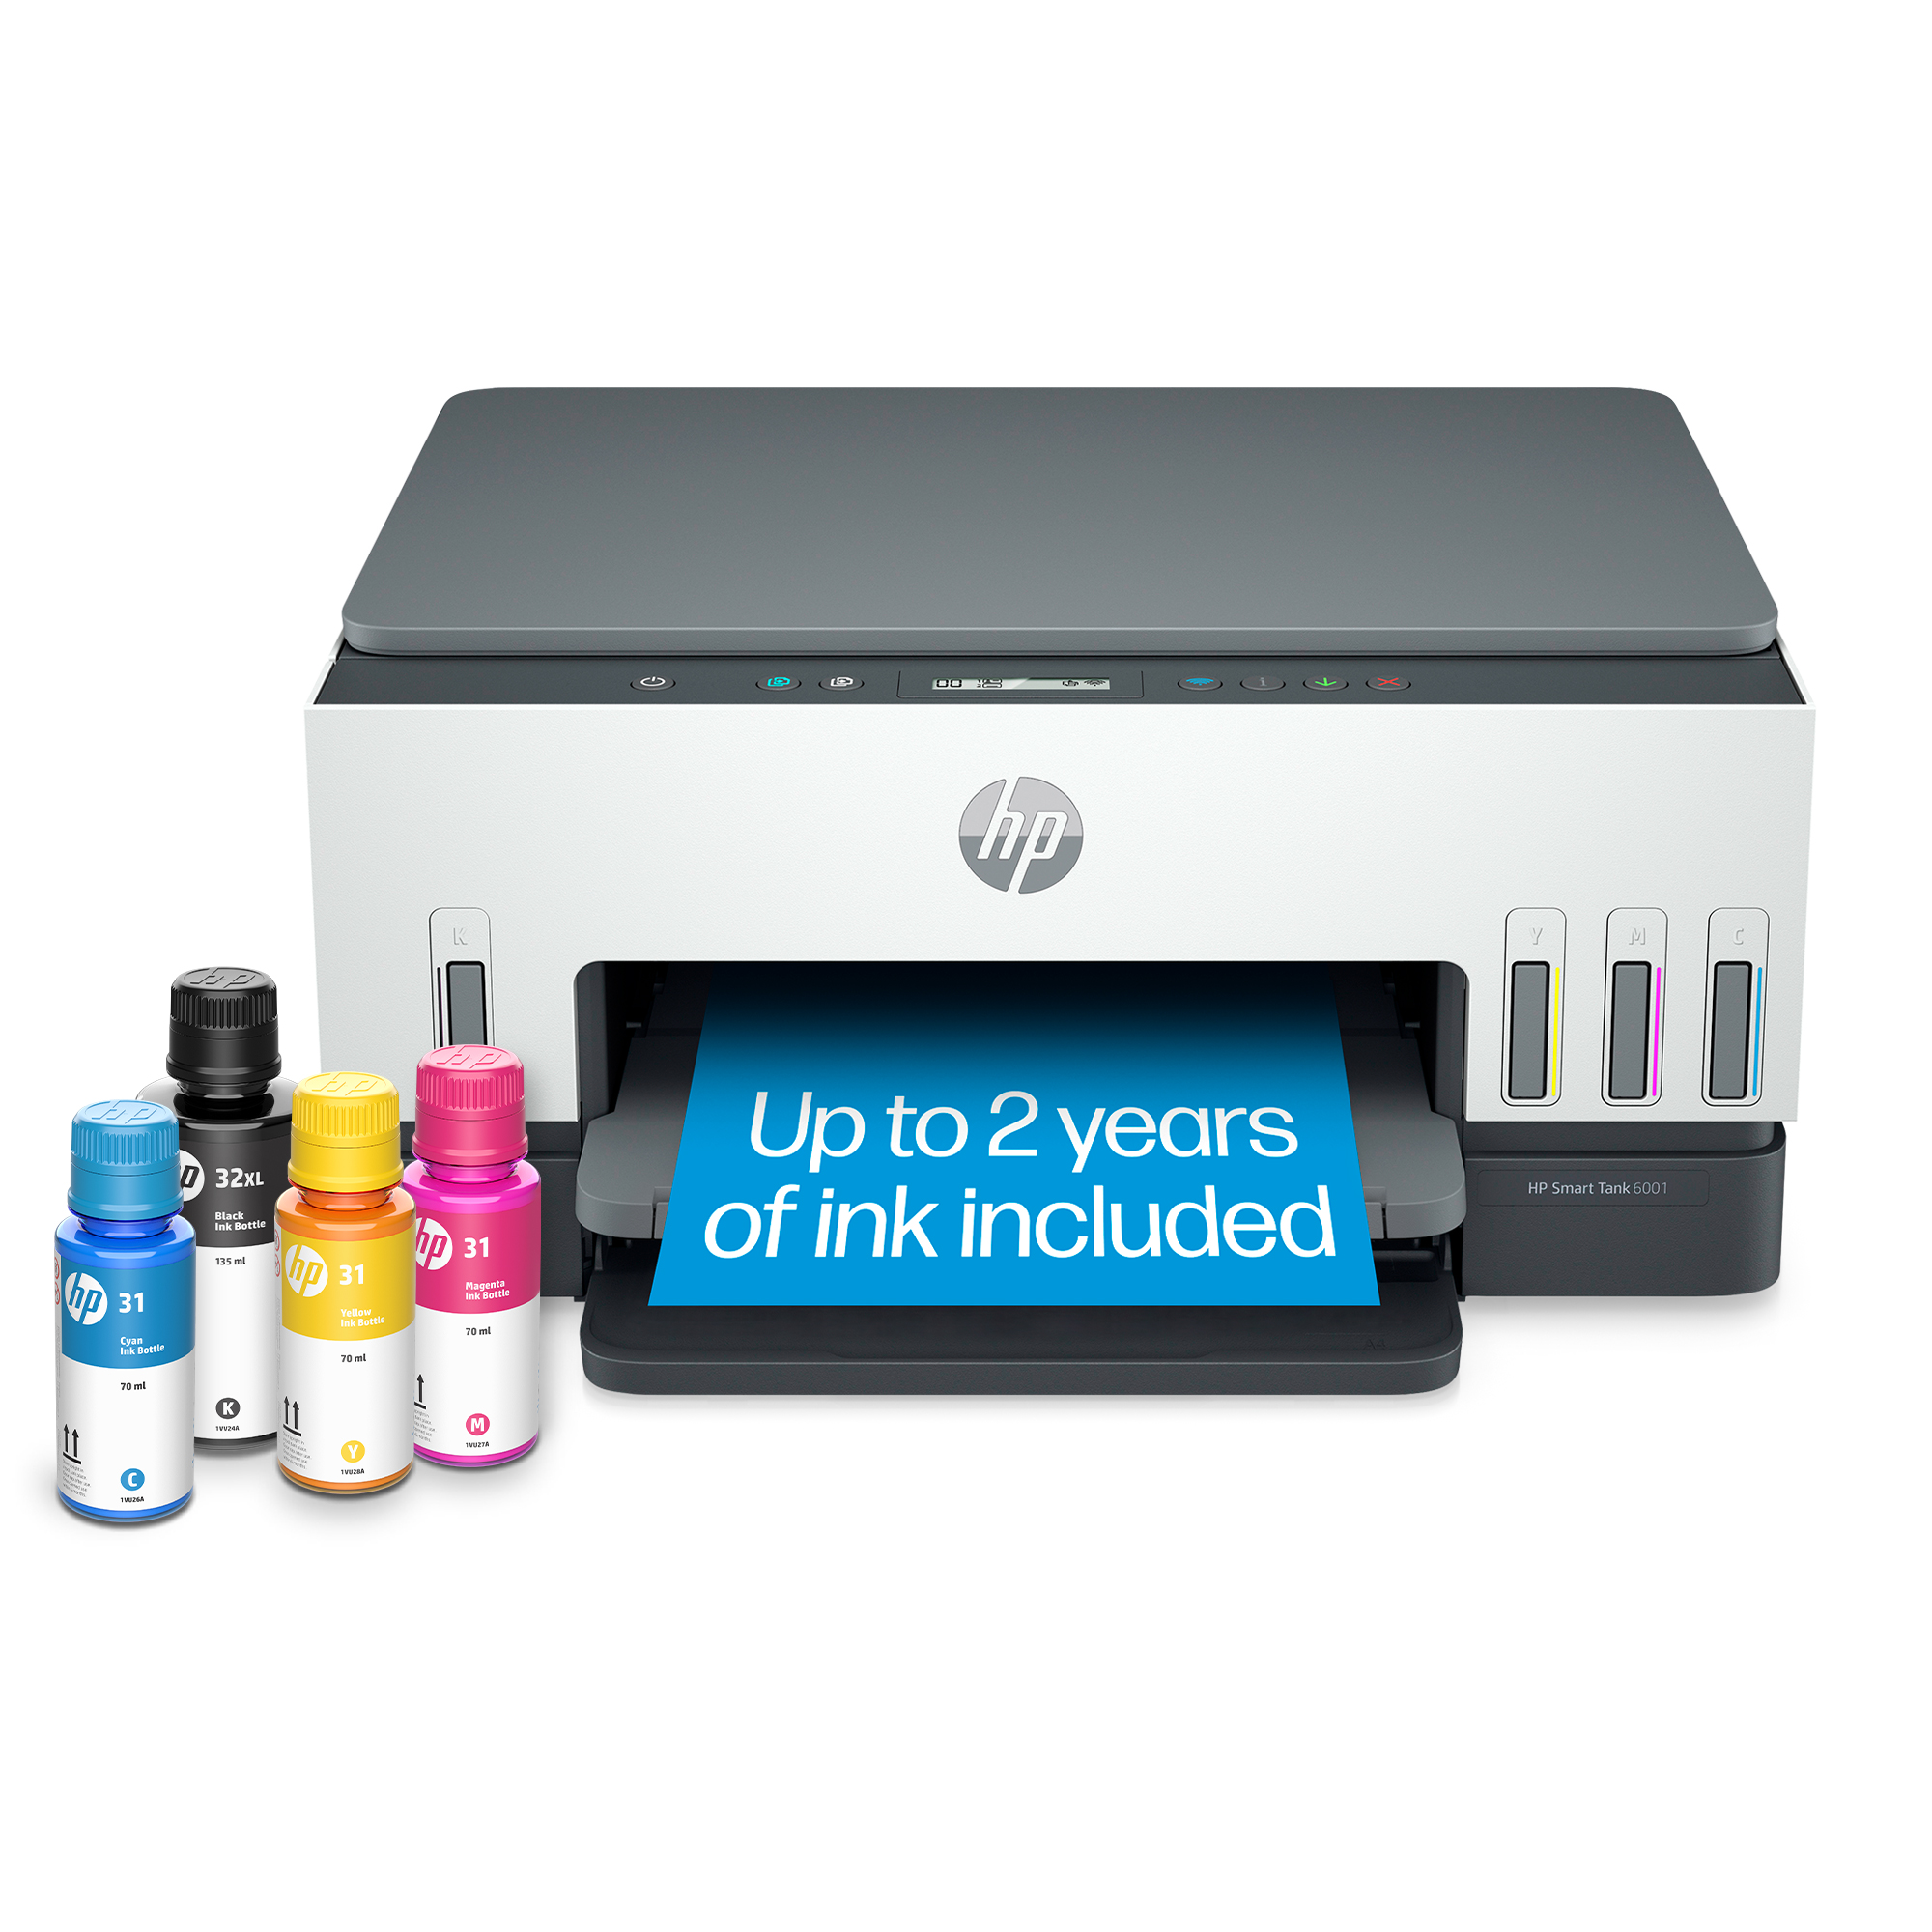 Wireless Supertank All-in-One Ink 6001 up HP Tank Color home of Smart 2 with Included Years Printer Inkjet to